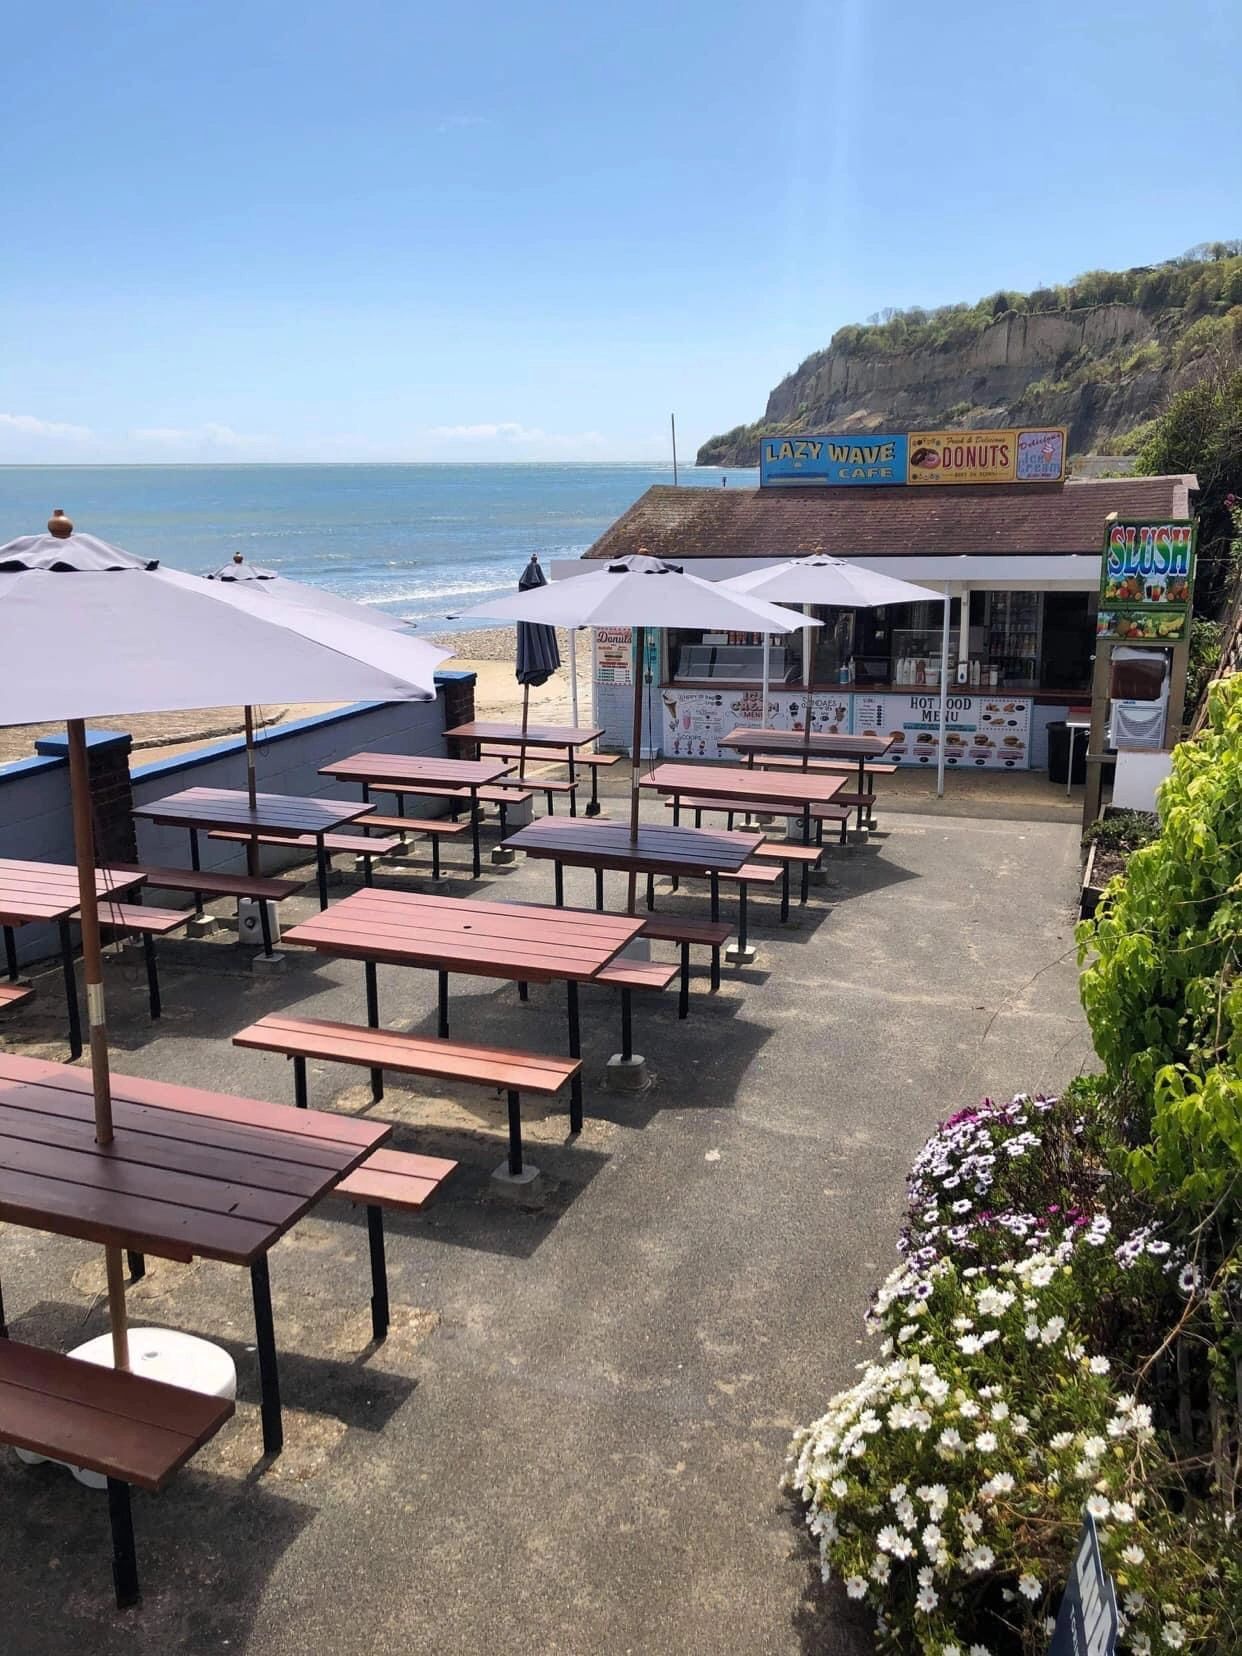 We also have a second location on Shanklin esplanade called The Lazy Wave! Open 10am-6pm